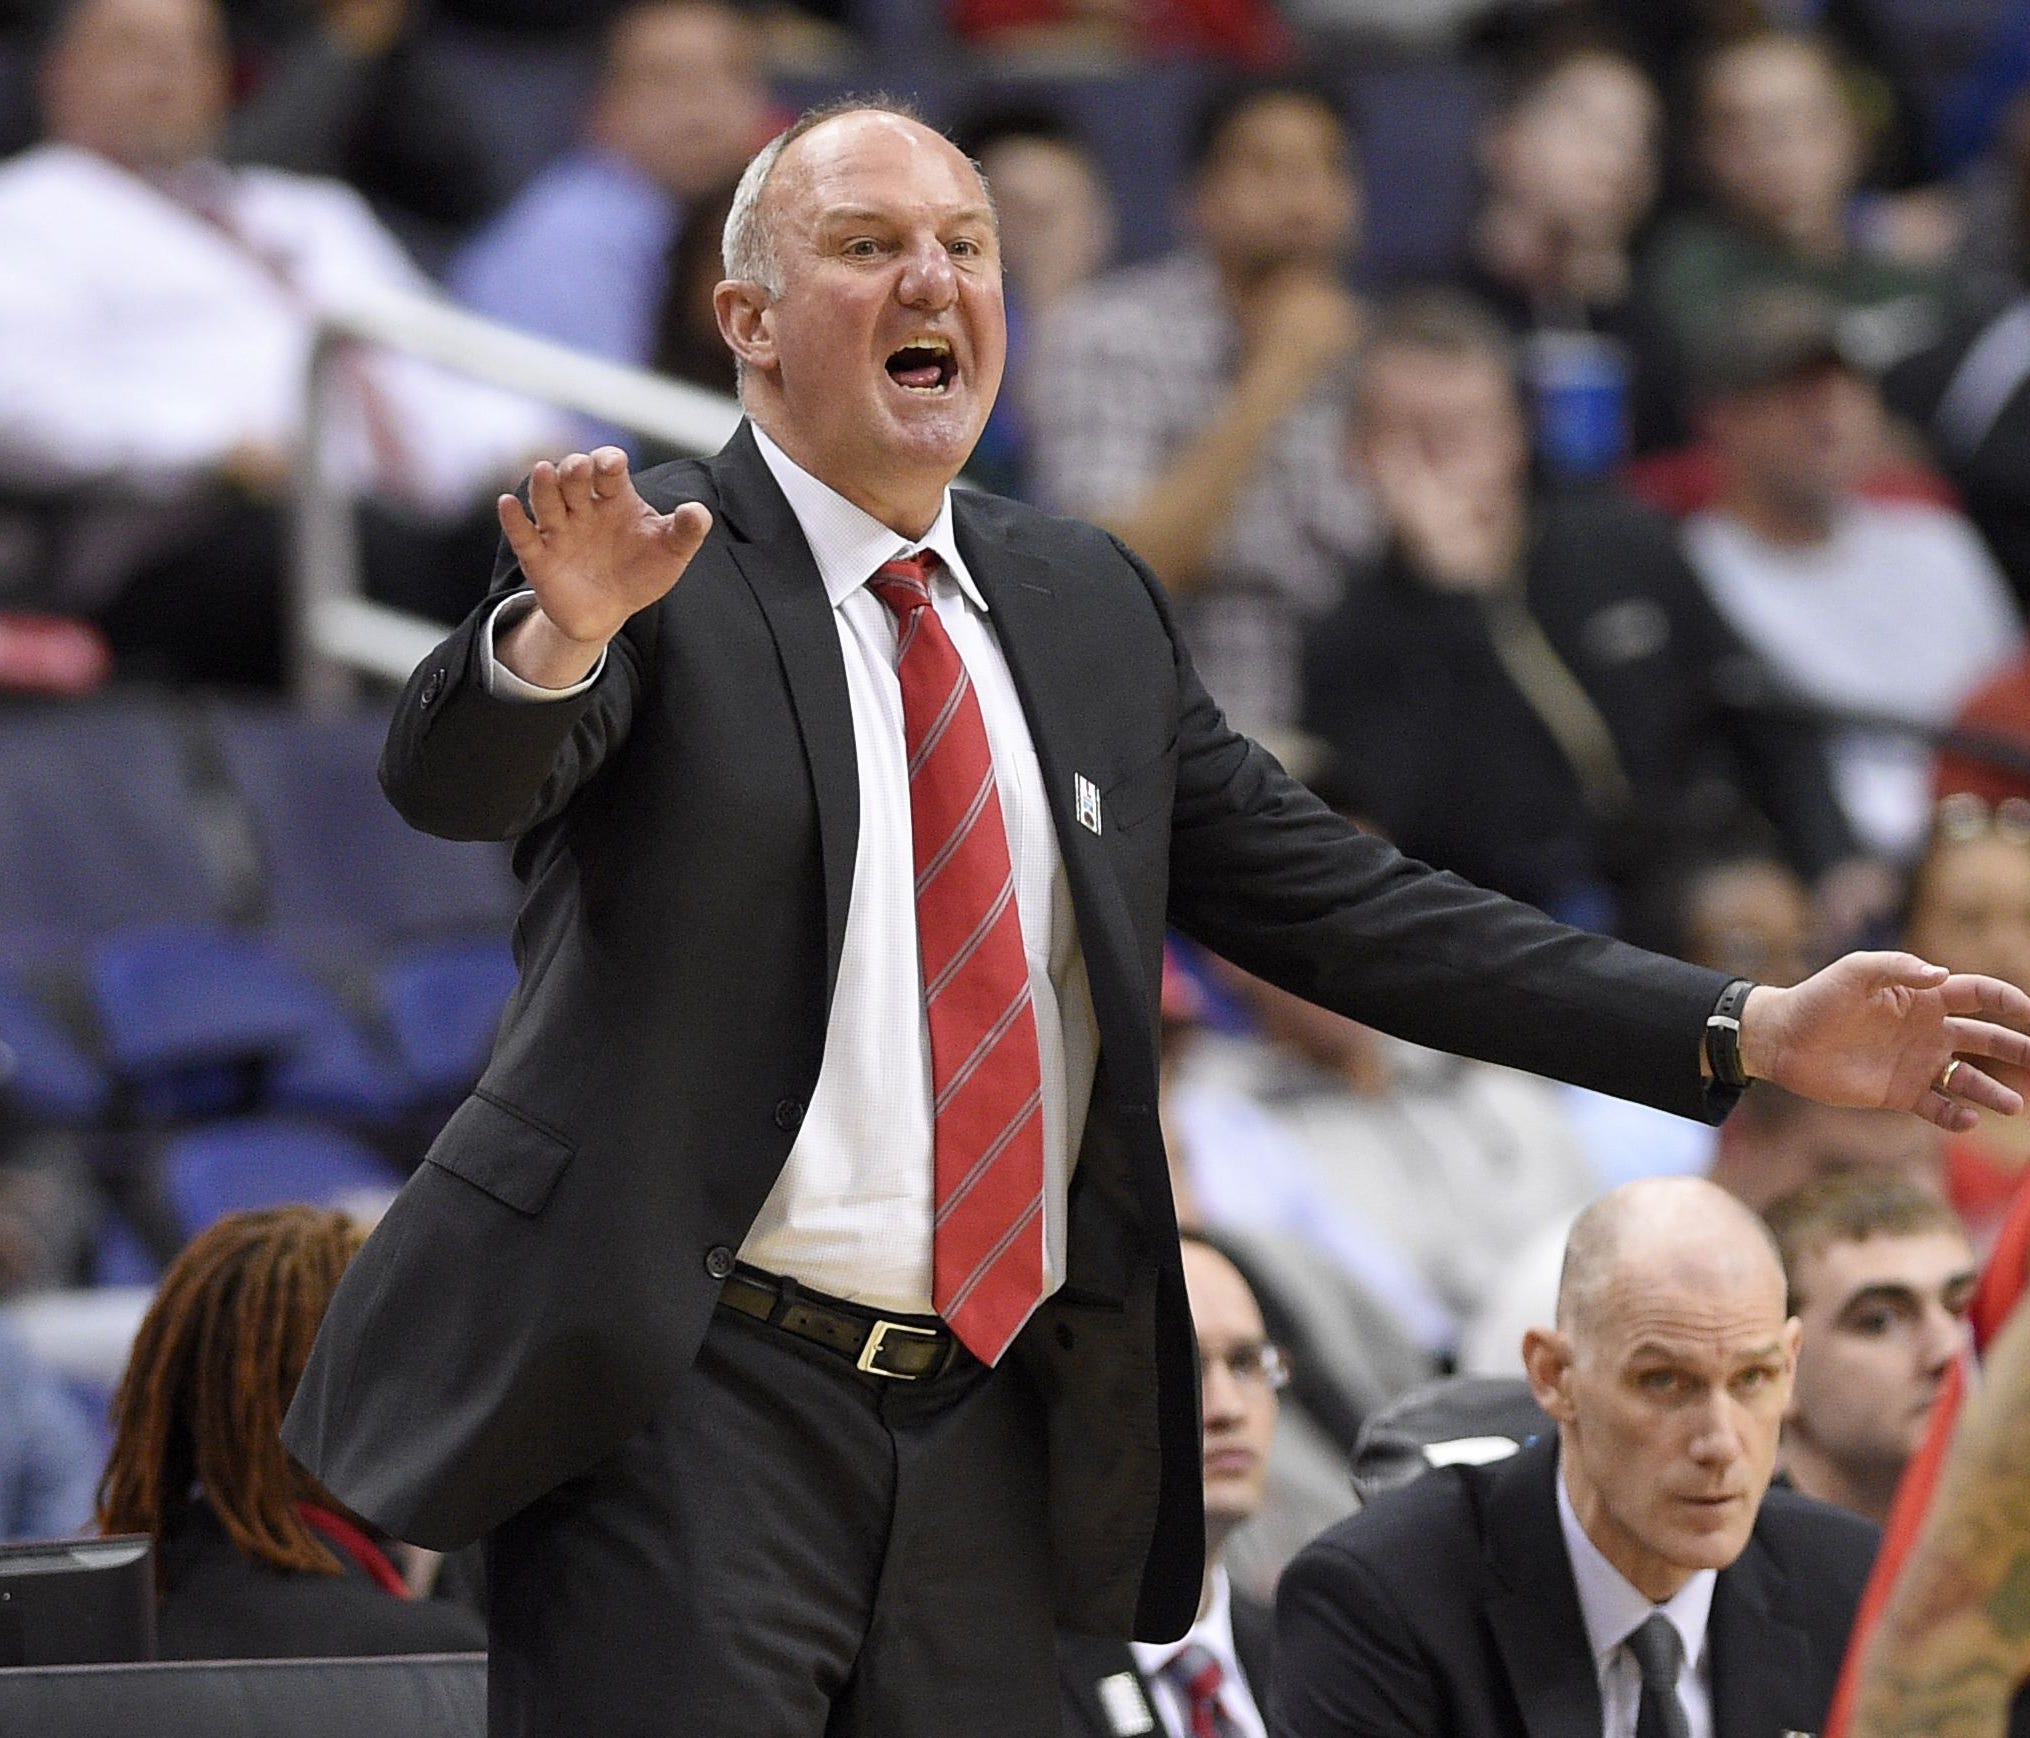 Ohio State head coach Thad Matta gestures during the second half of an NCAA college basketball game in the Big Ten tournament against Rutgers, Wednesday, March 8, 2017, in Washington. Rutgers won 66-57. (AP Photo/Nick Wass)